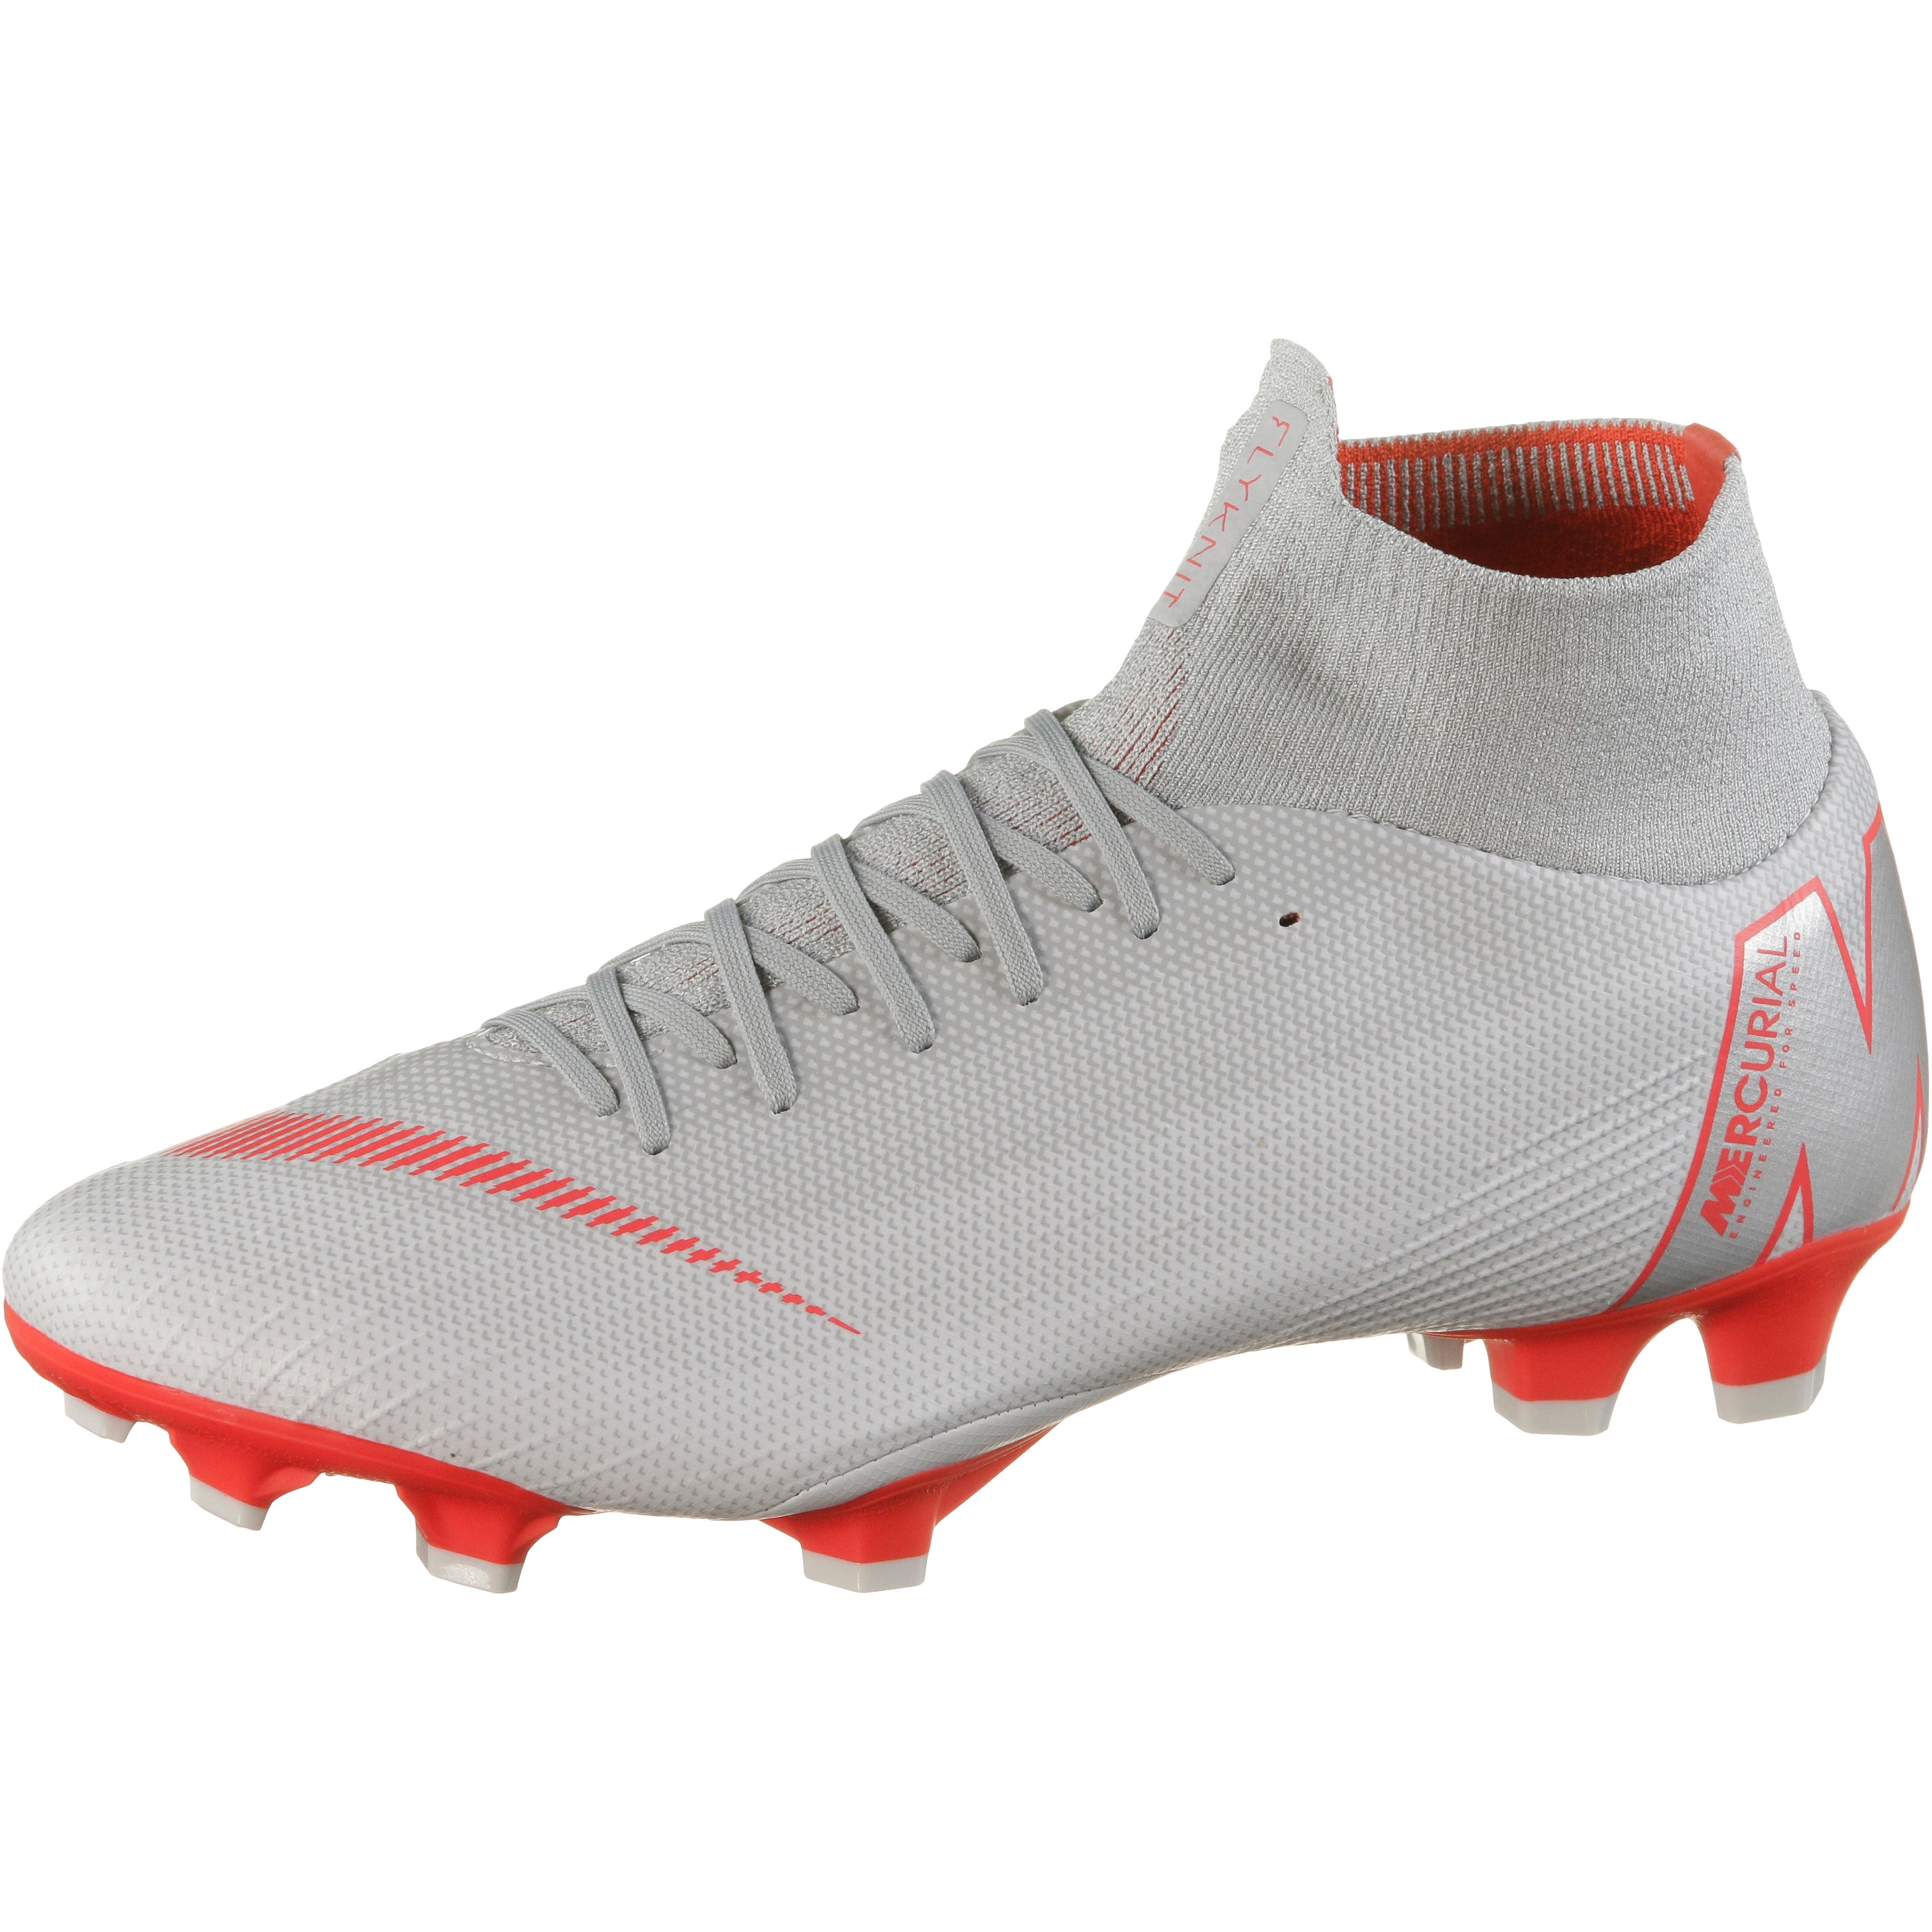 Nike Mercurial Superfly 6 Pro AG PRO Raised On Concrete.